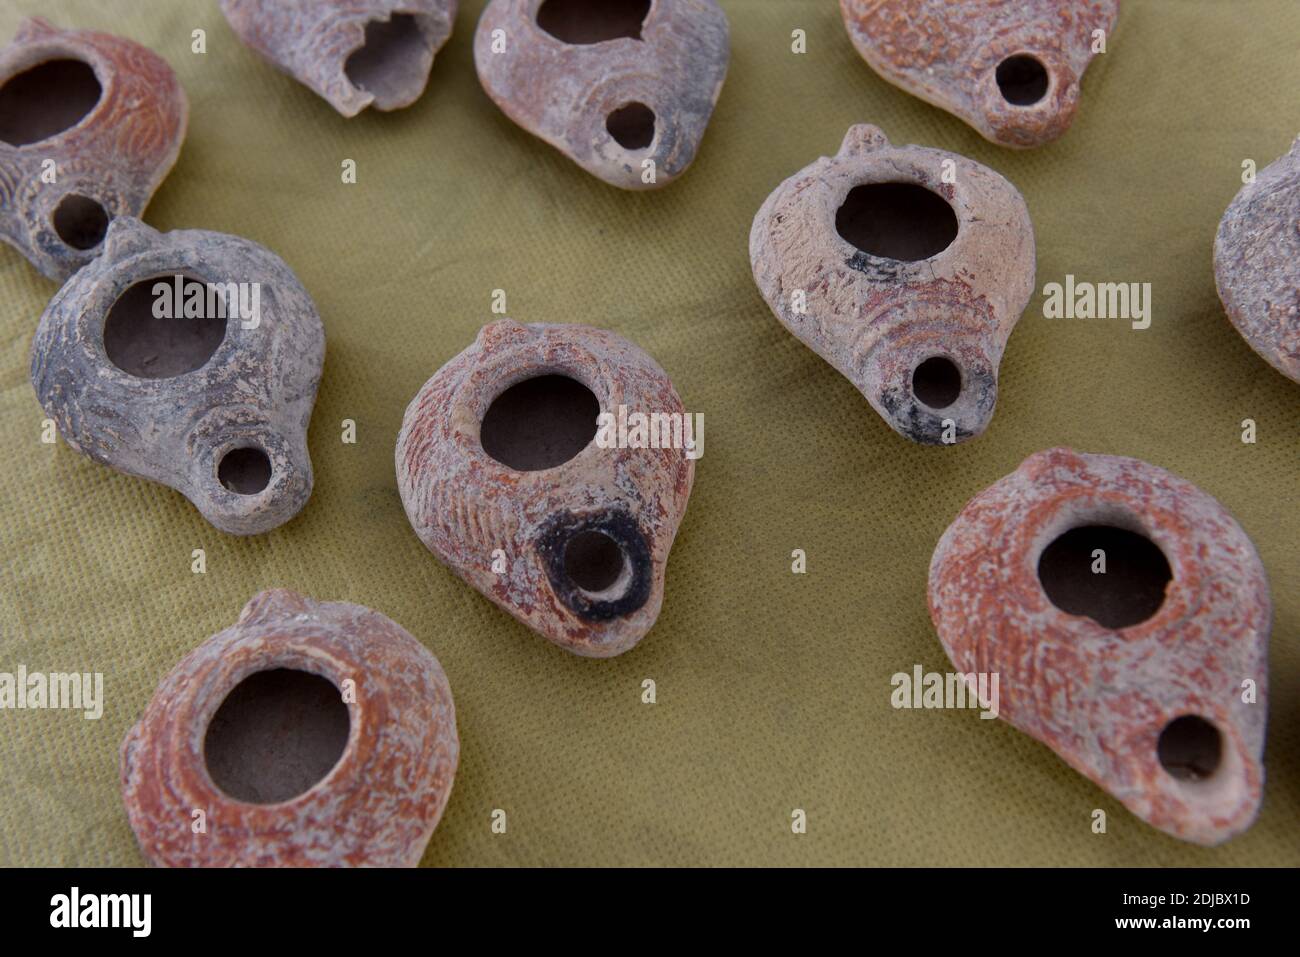 Beit Shemesh, Israel. 14th Dec, 2020. The Israel Antiquities Authority displays ancient Beit Nattif oil lamps at an ancient oil lamp workshop discovered in Beit Shemesh, Israel, on Monday, December 14, 2020. Hundreds of ceramic oil lamps, molds and figurine fragments from 1,600-1,700 years ago were found during excavation before the building of a new neighborhood in Beit Shemesh. Photo by Debbie Hill/UPI Credit: UPI/Alamy Live News Stock Photo